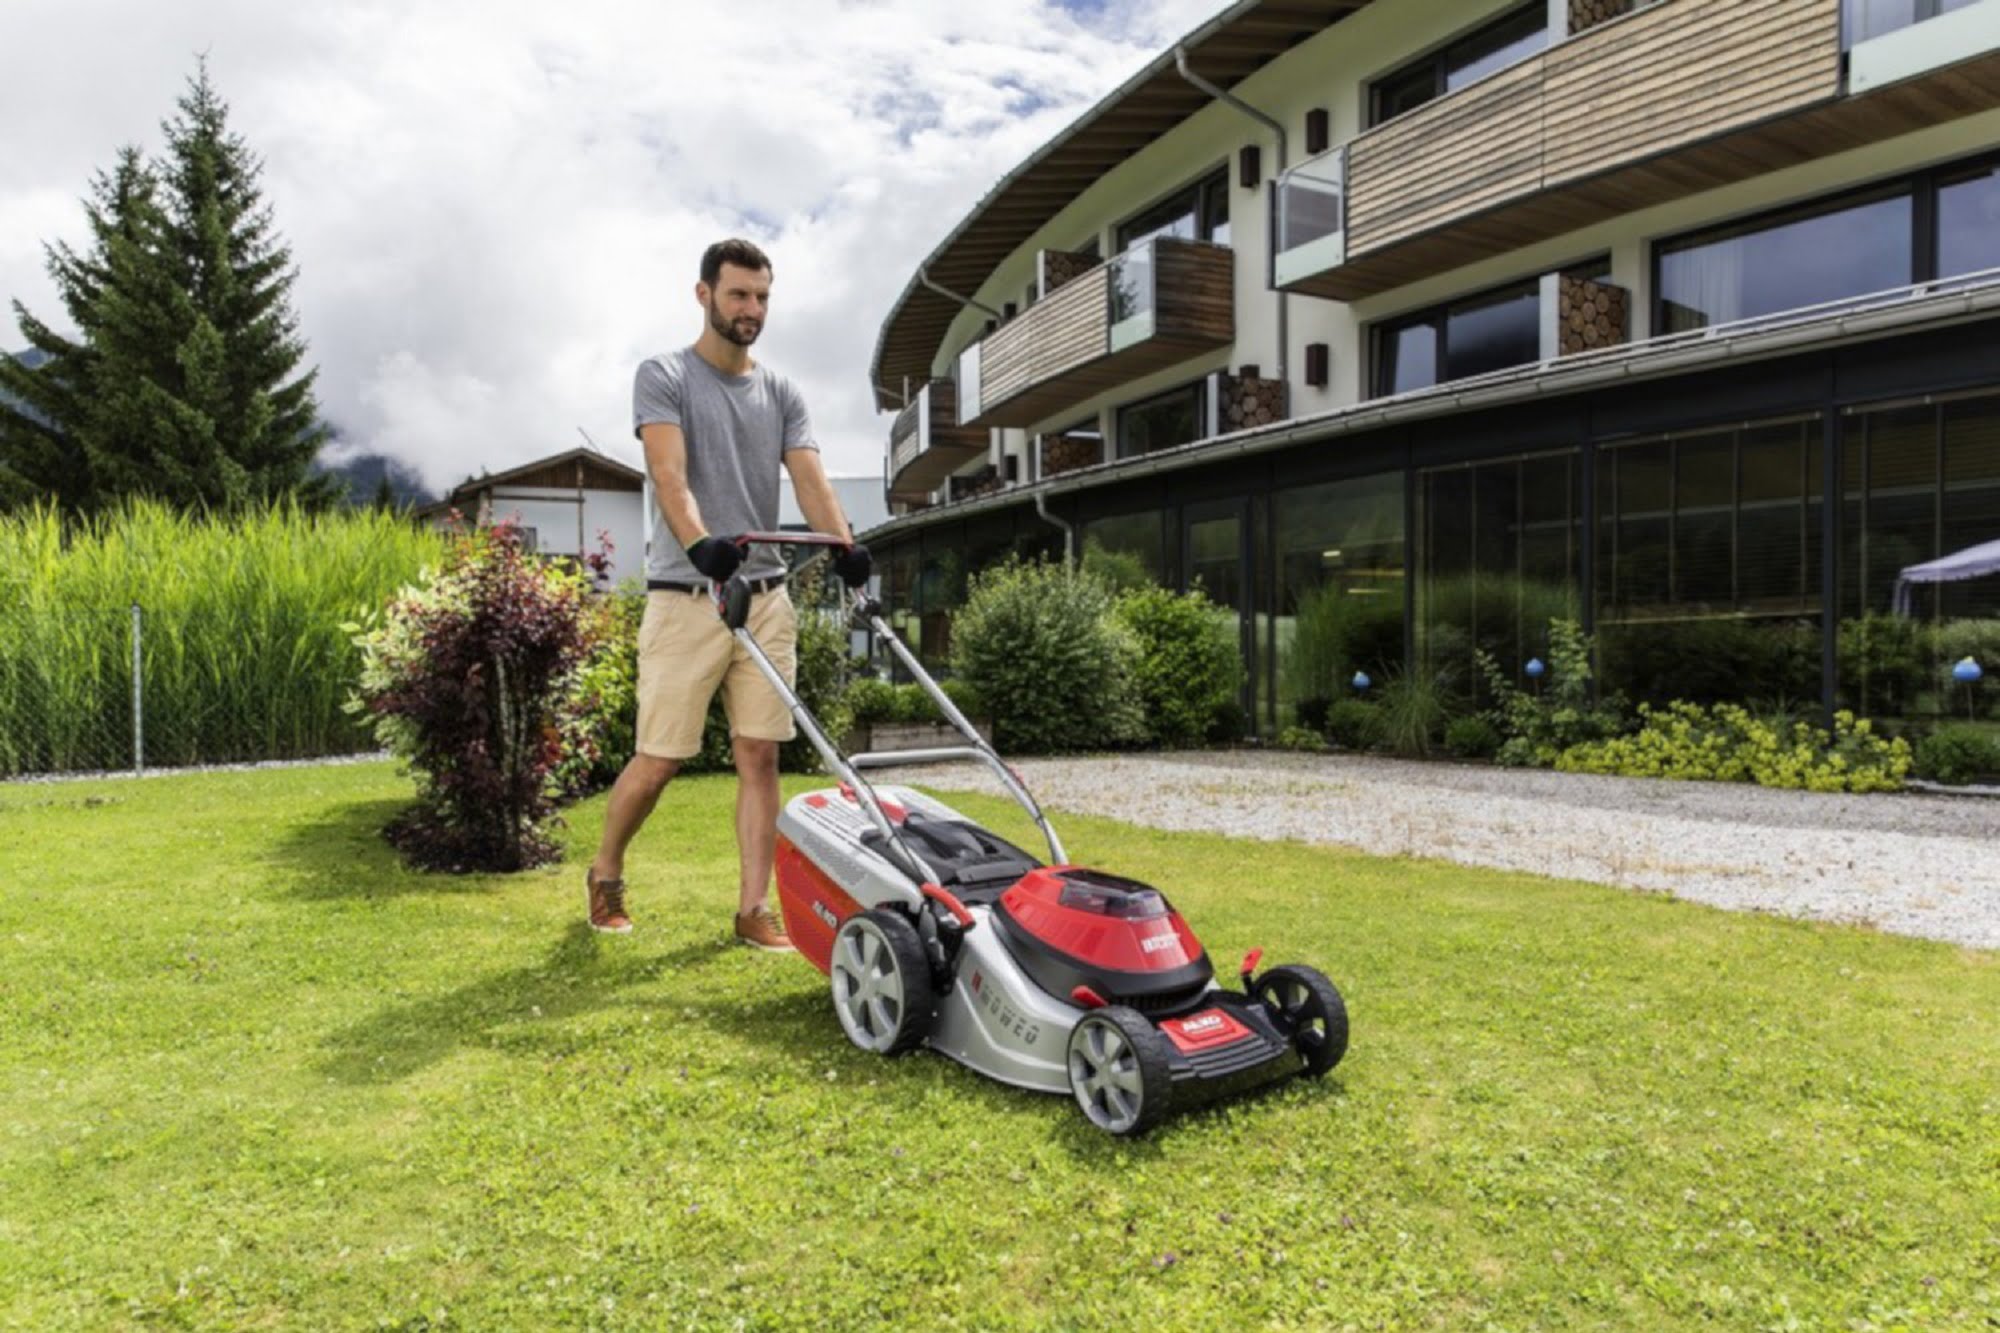 The lawn mower 5.0 ultra